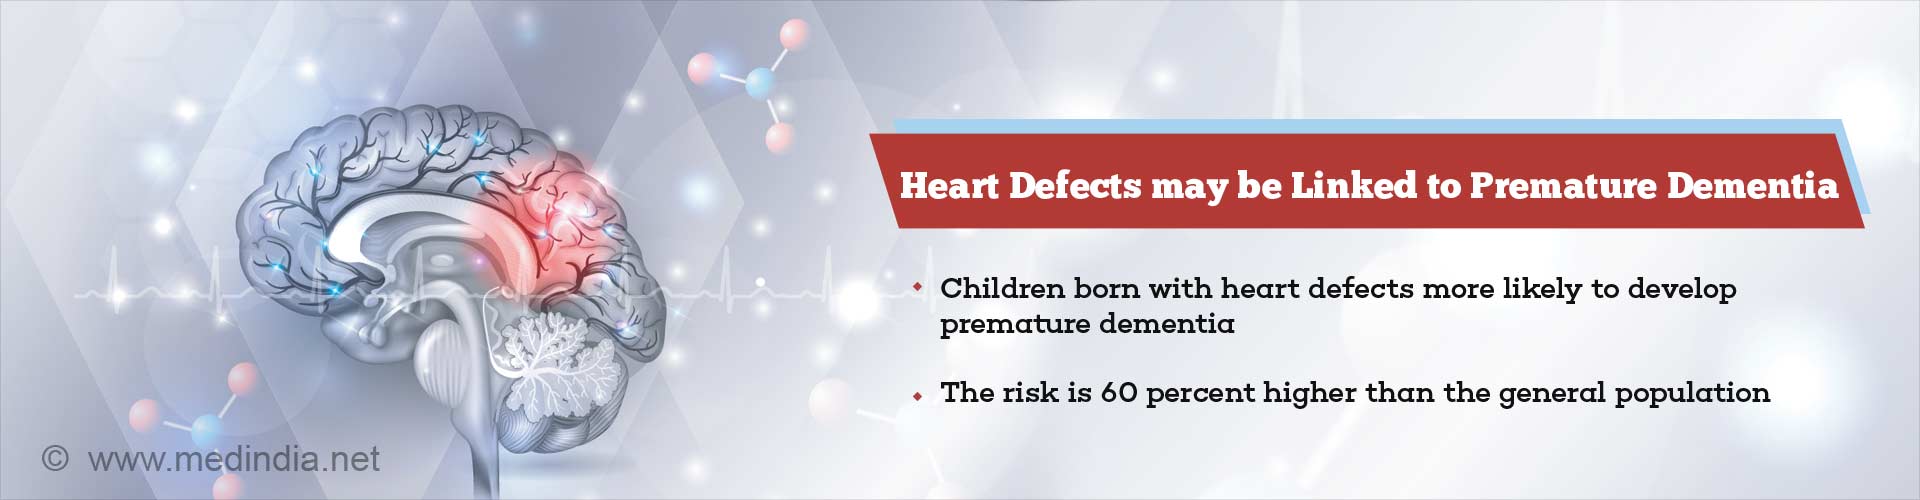 heart defects may be linked to premature dementia
- children born with heart defects more likely to develop premature dementia
- the risk is 60 percent higher than the general population